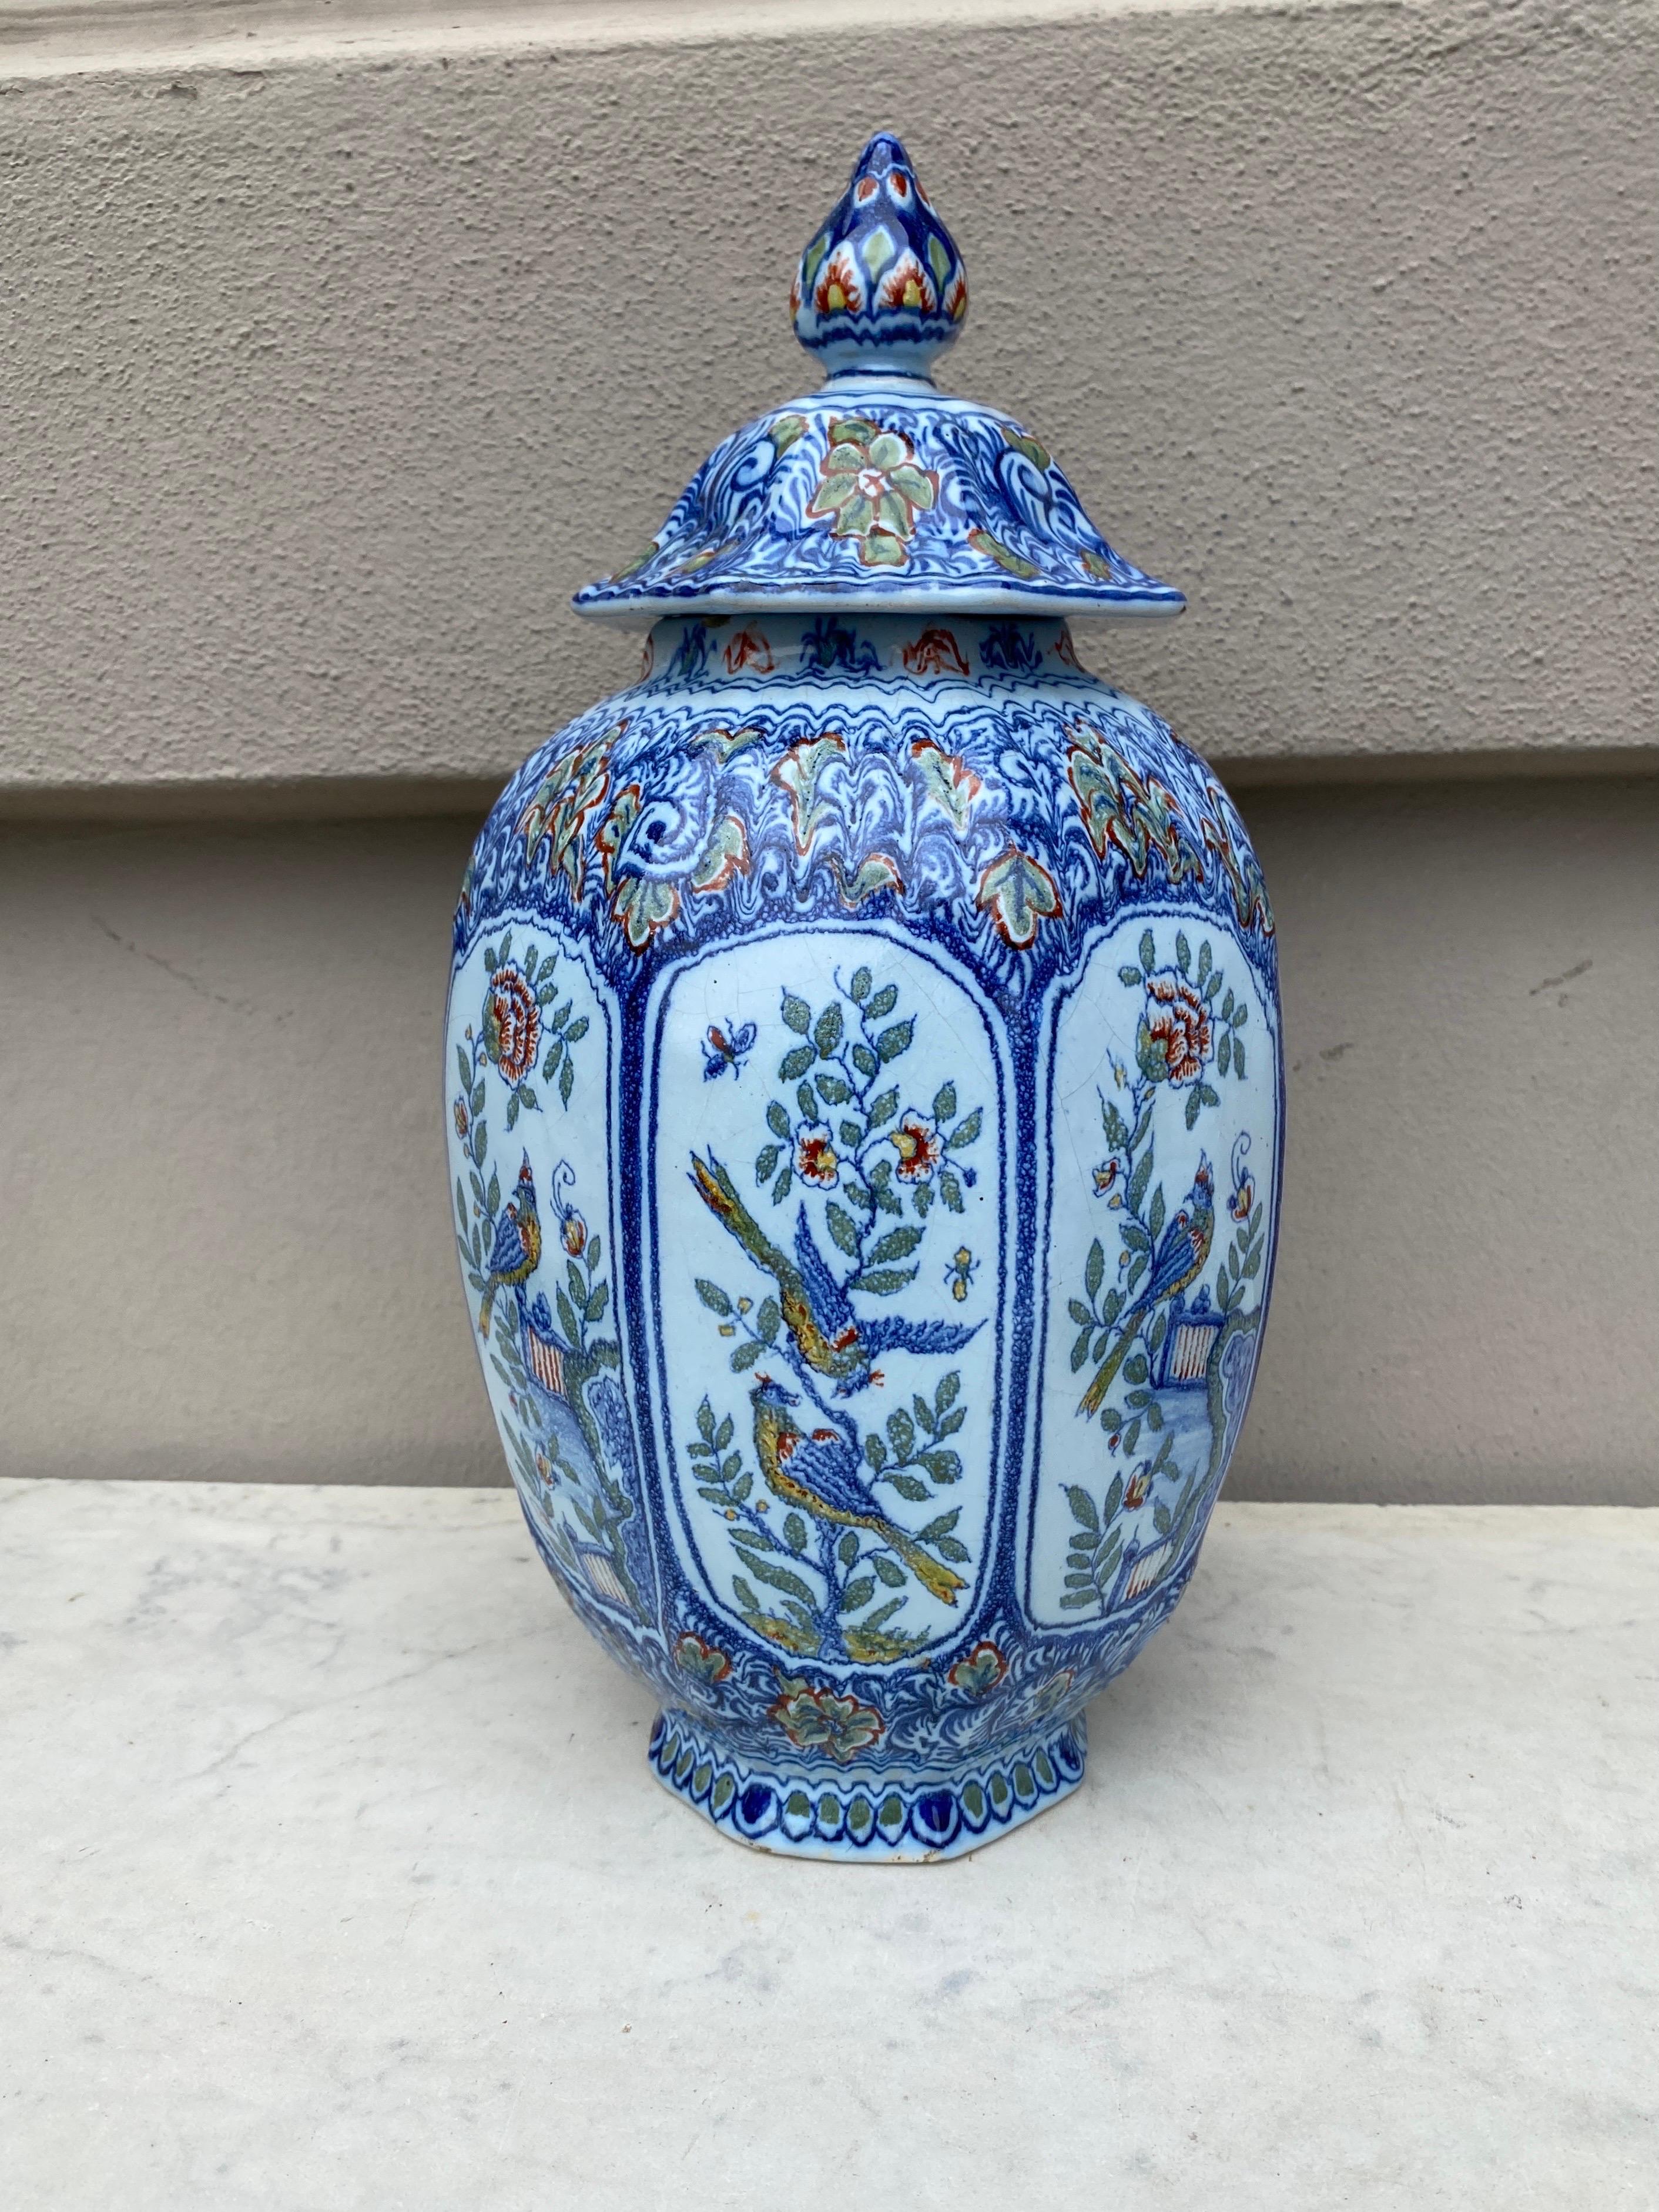 Large Blue and White French Faience Ginger Jar with Birds Desvres, circa 1880 For Sale 5